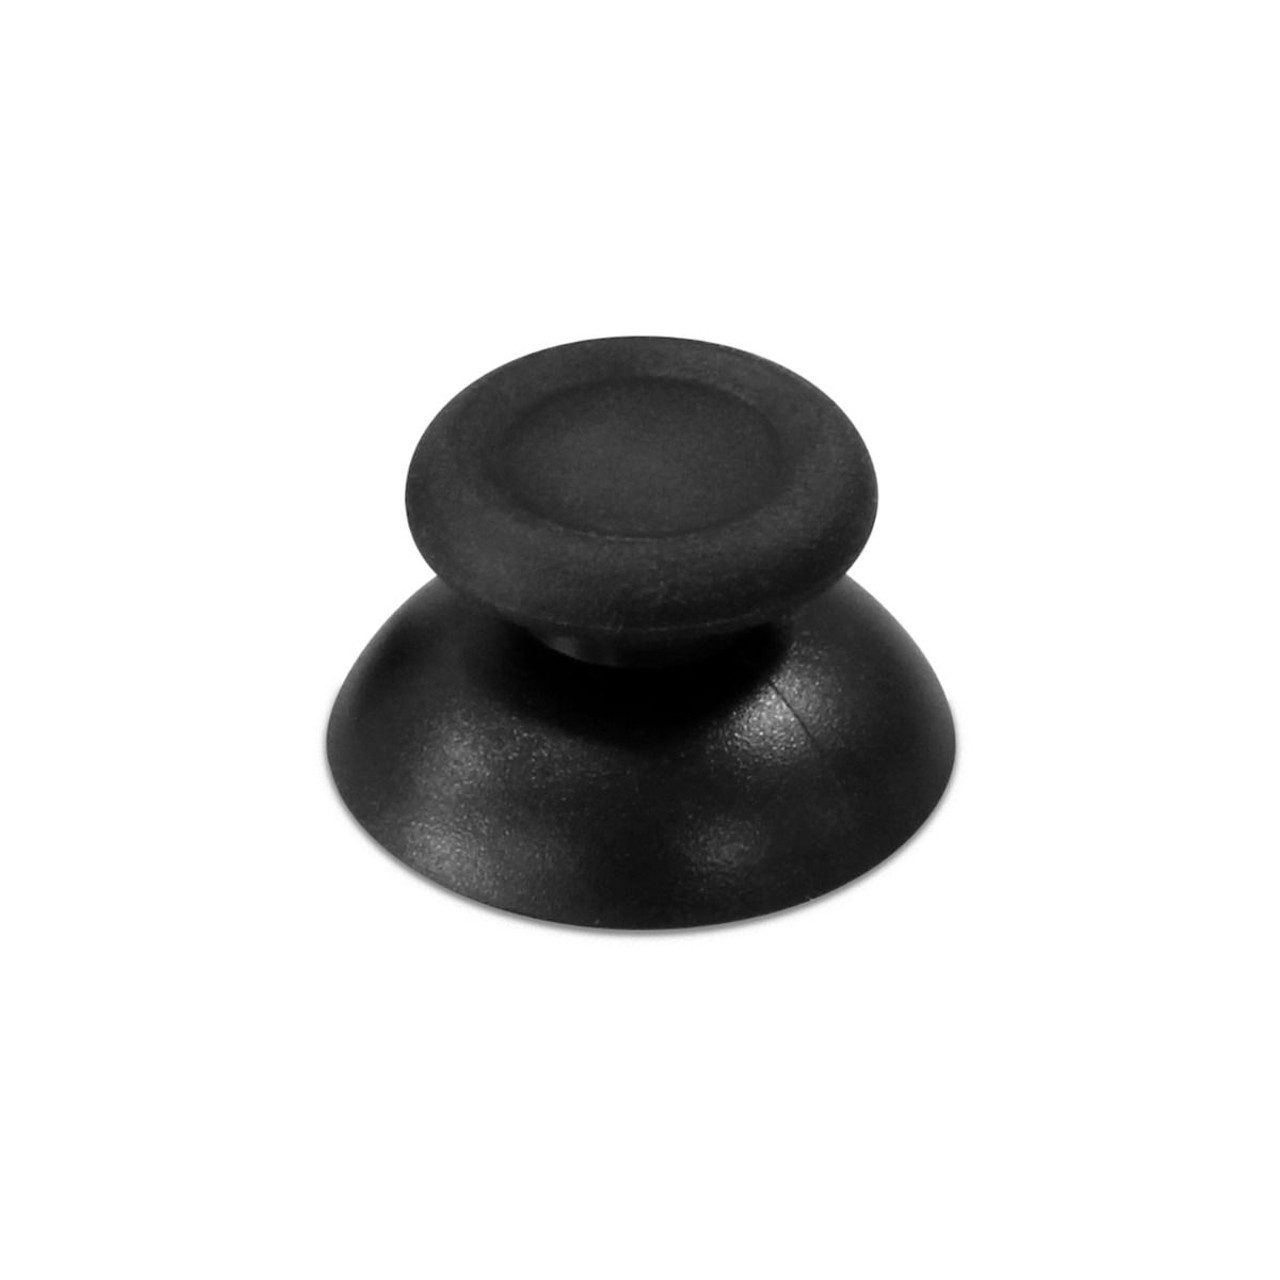 PS4 Controller Analog Cap Replacement - Black (Y7)